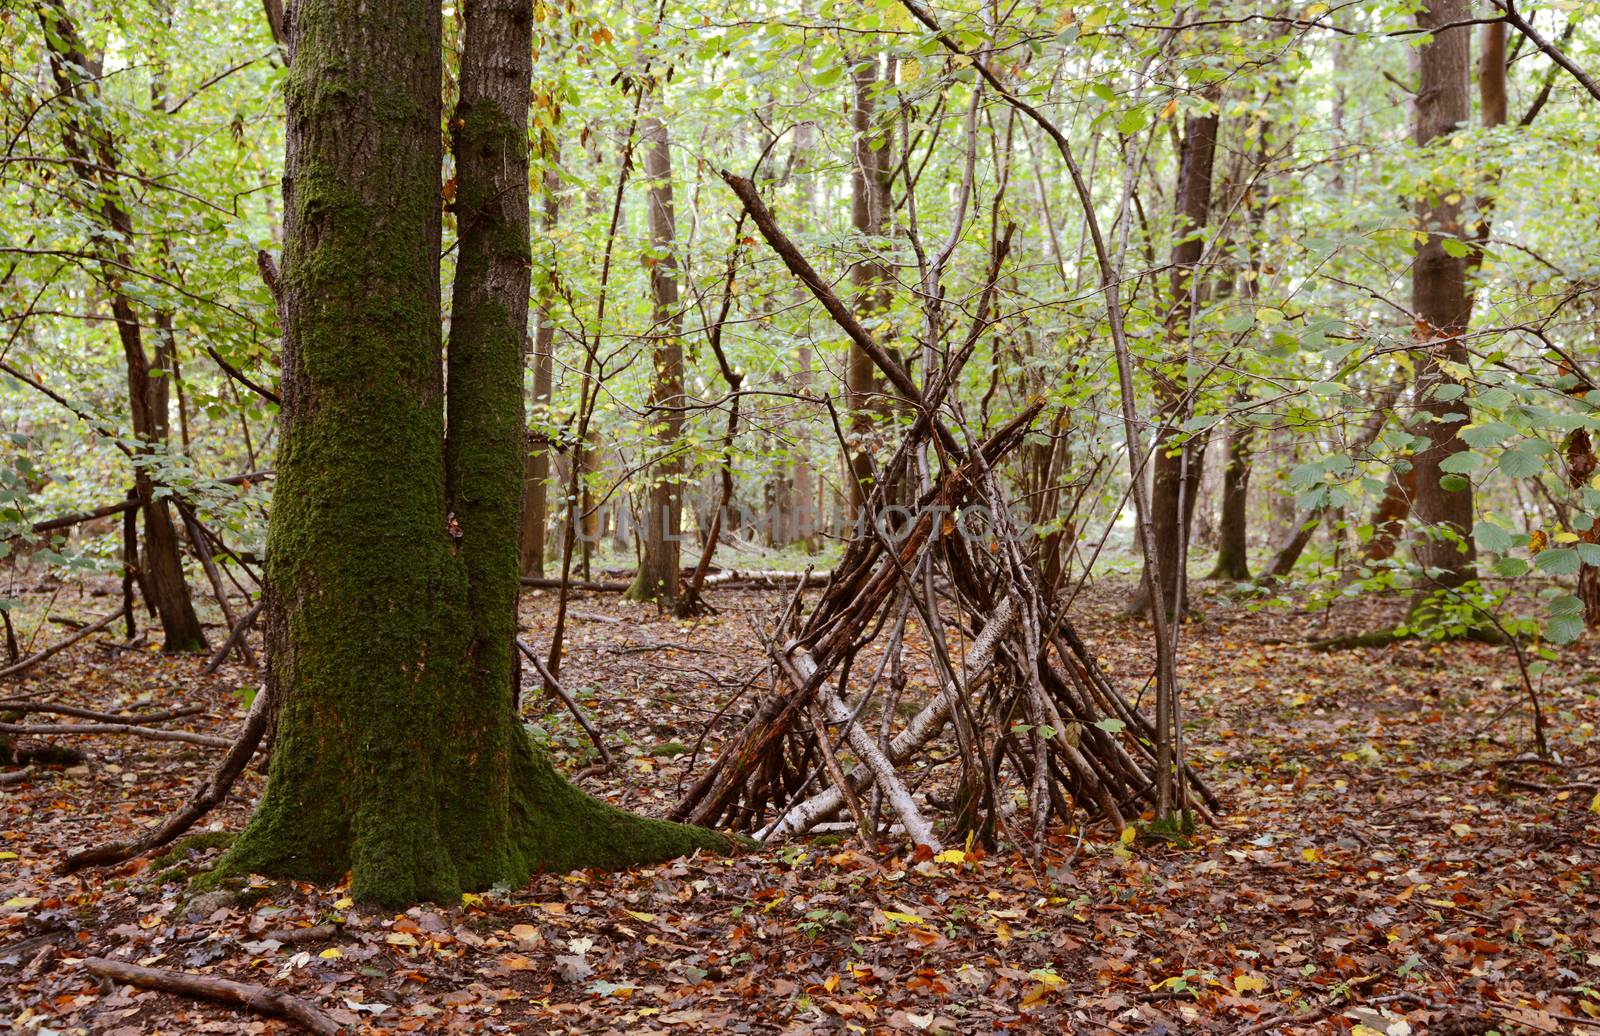 Improvised wigwam shelter built from fallen branches  by sarahdoow